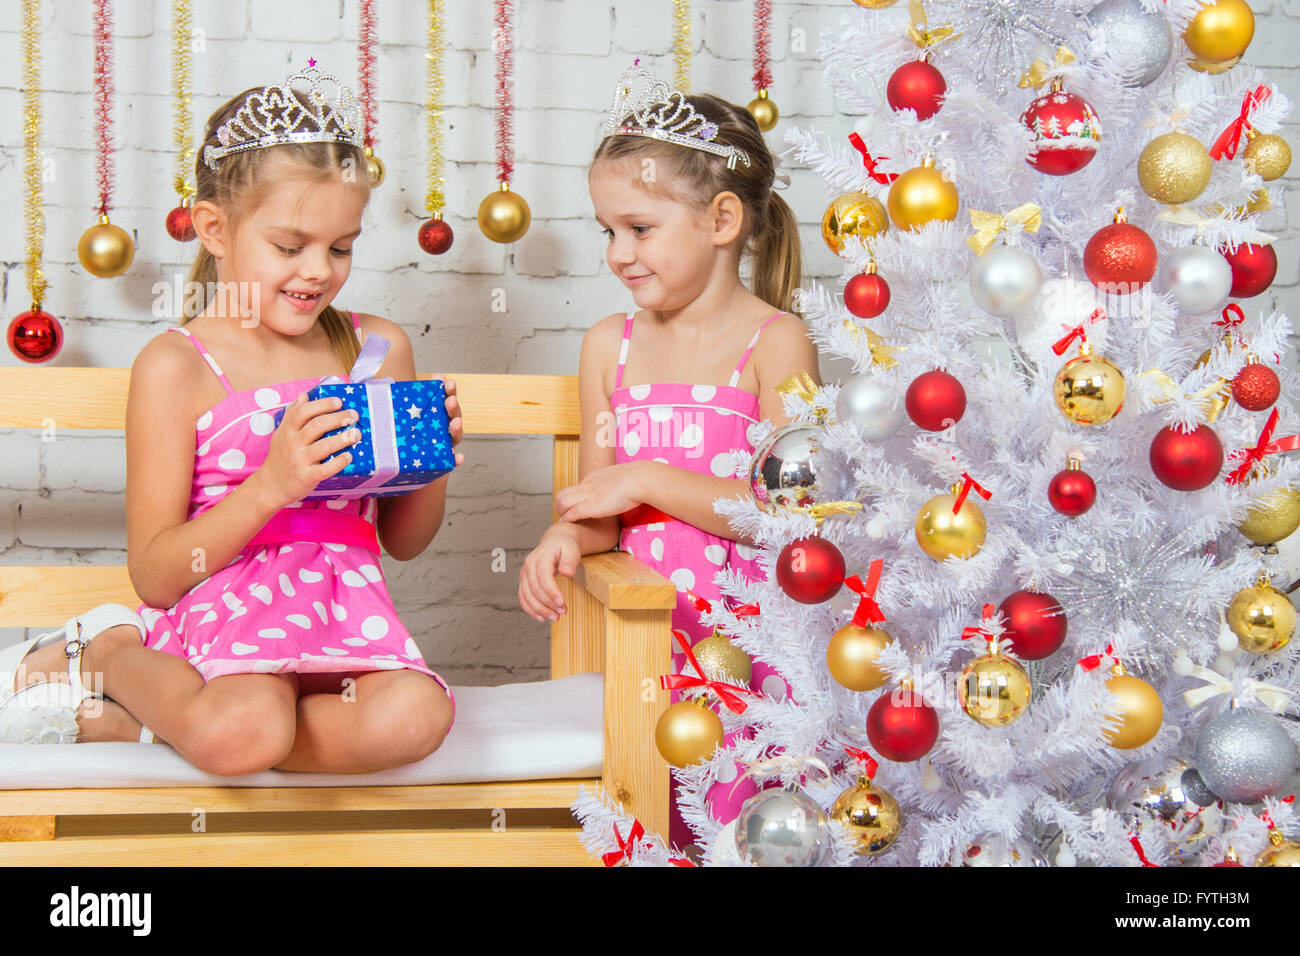 The girl gave another girl New Years gift Stock Photo